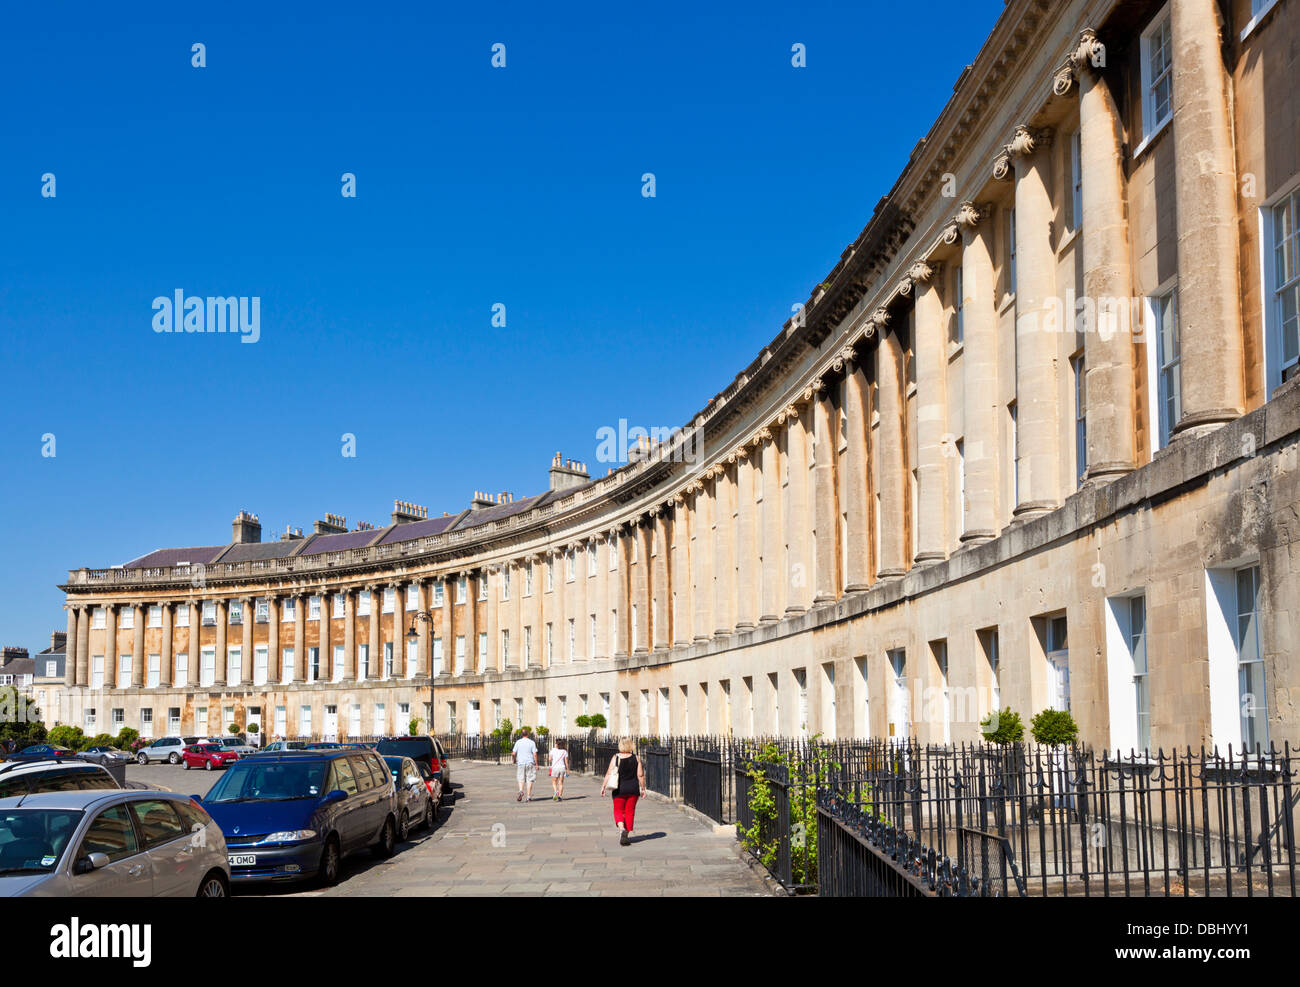 The Royal crescent terrace of Georgian houses with ornate railings Bath North east Somerset England Stock Photo